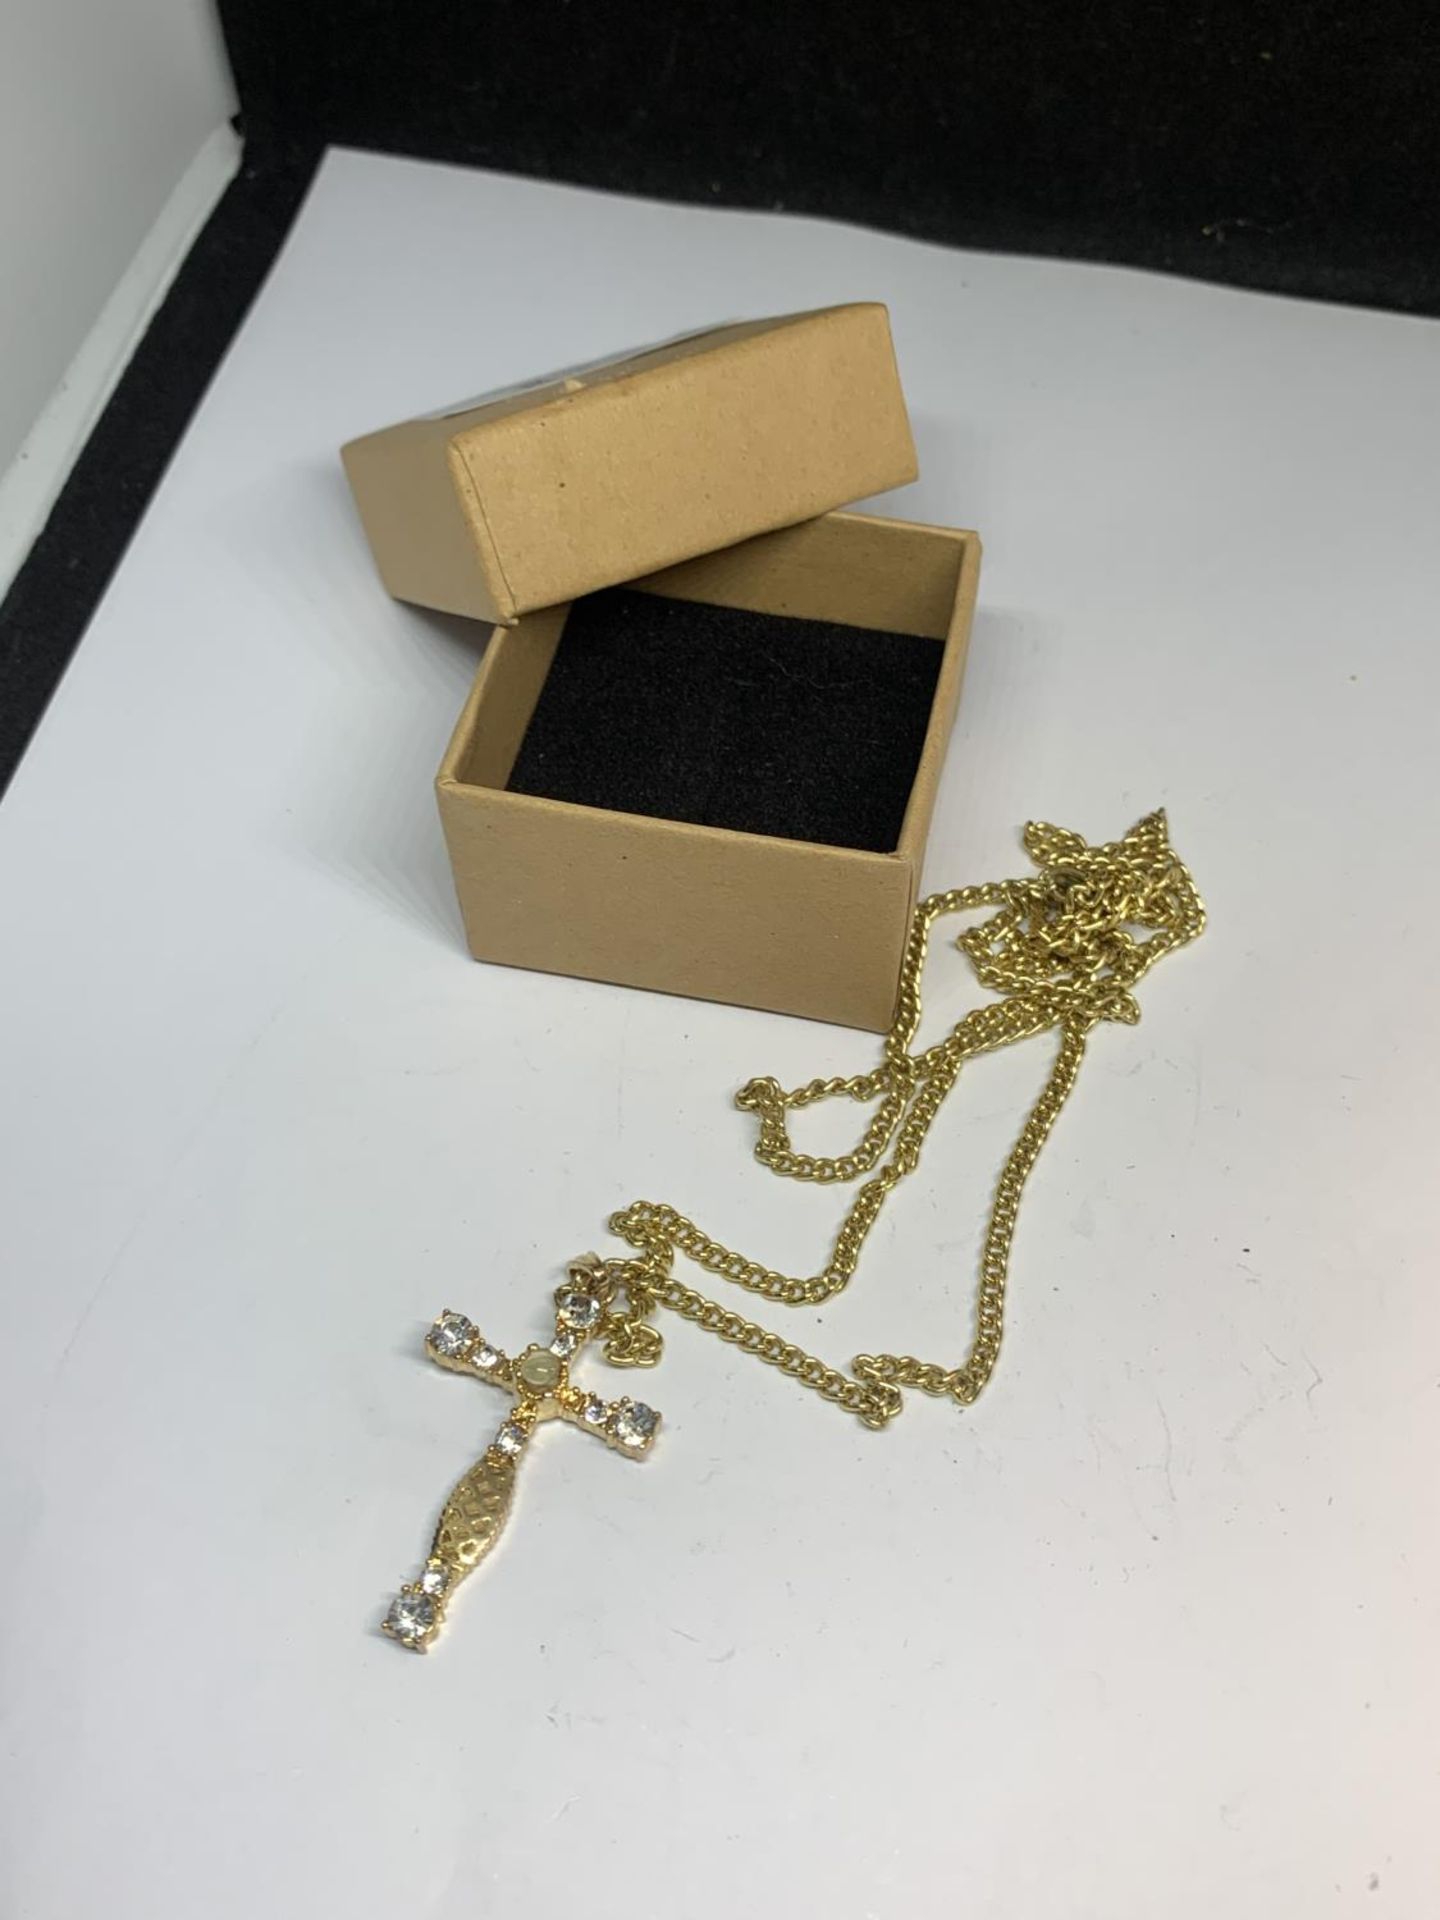 A NECKLACE WITH A CRYSTAL CROSS IN A PRESENTATION BOX